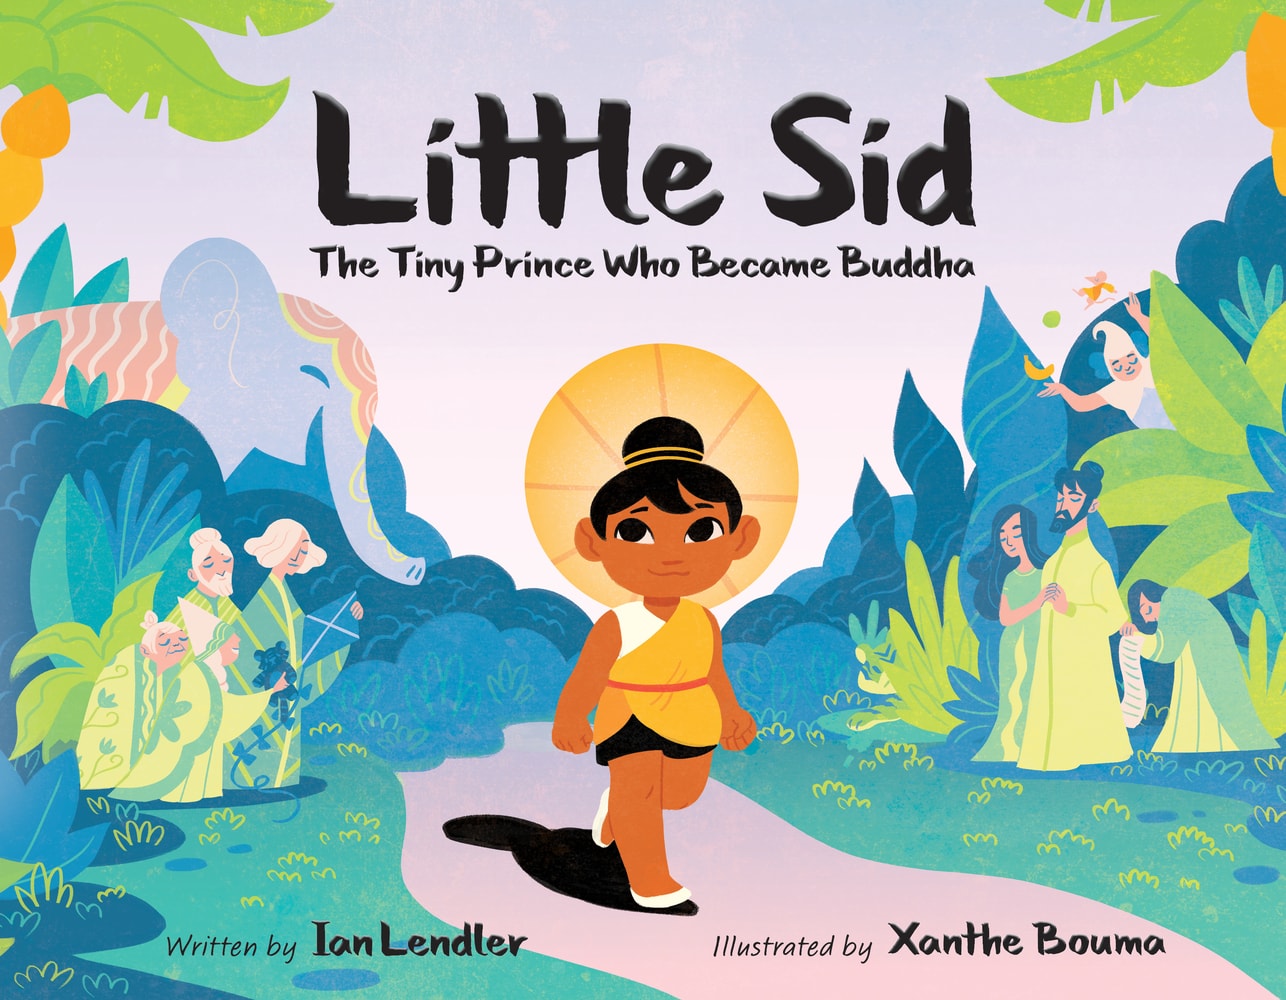 Little Sid: The Tiny Prince Who Became Buddha Review